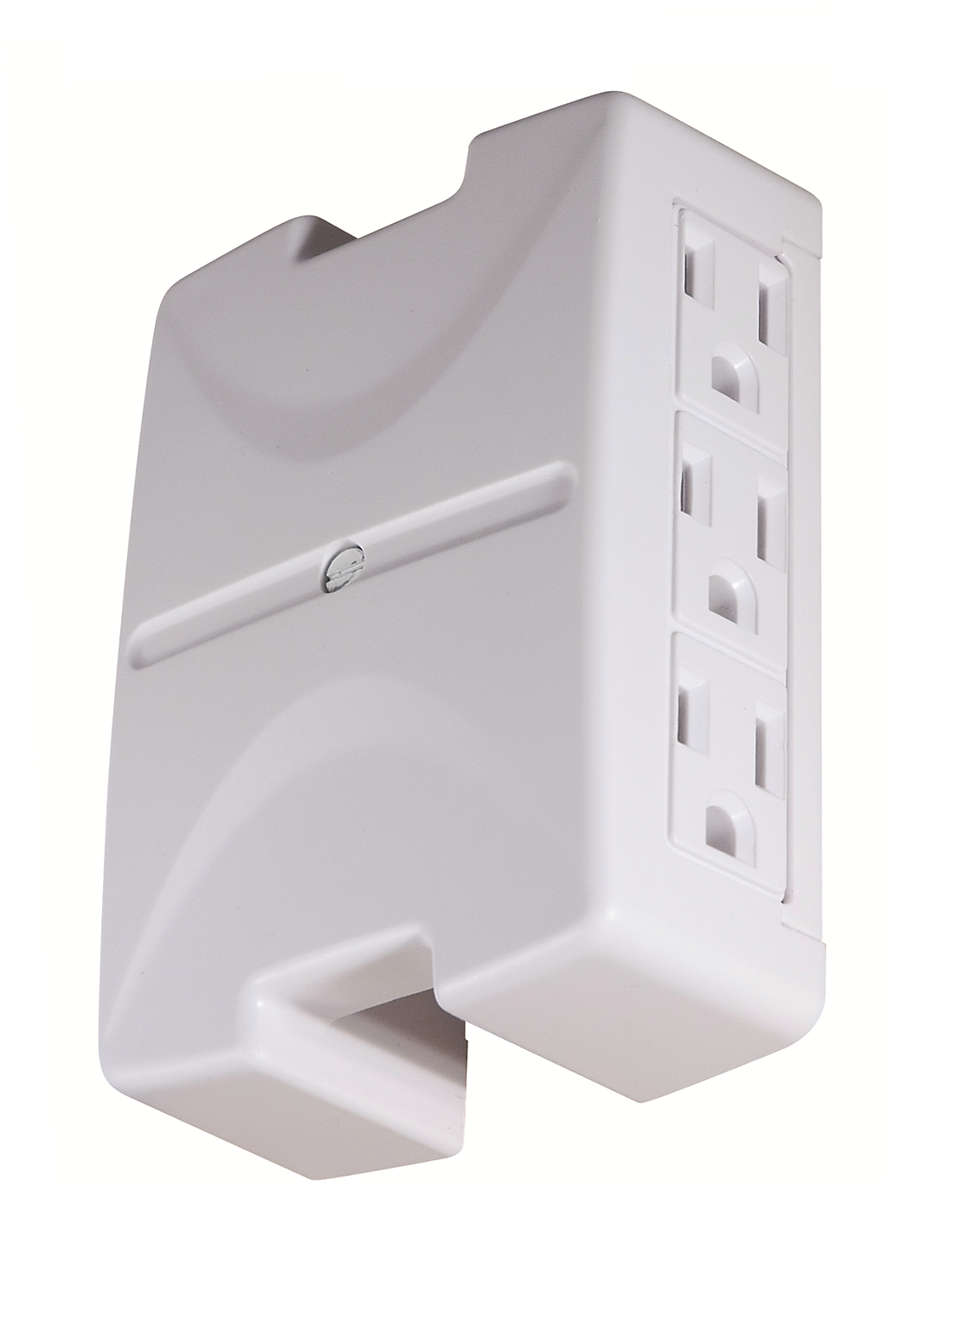 Expand your outlet space